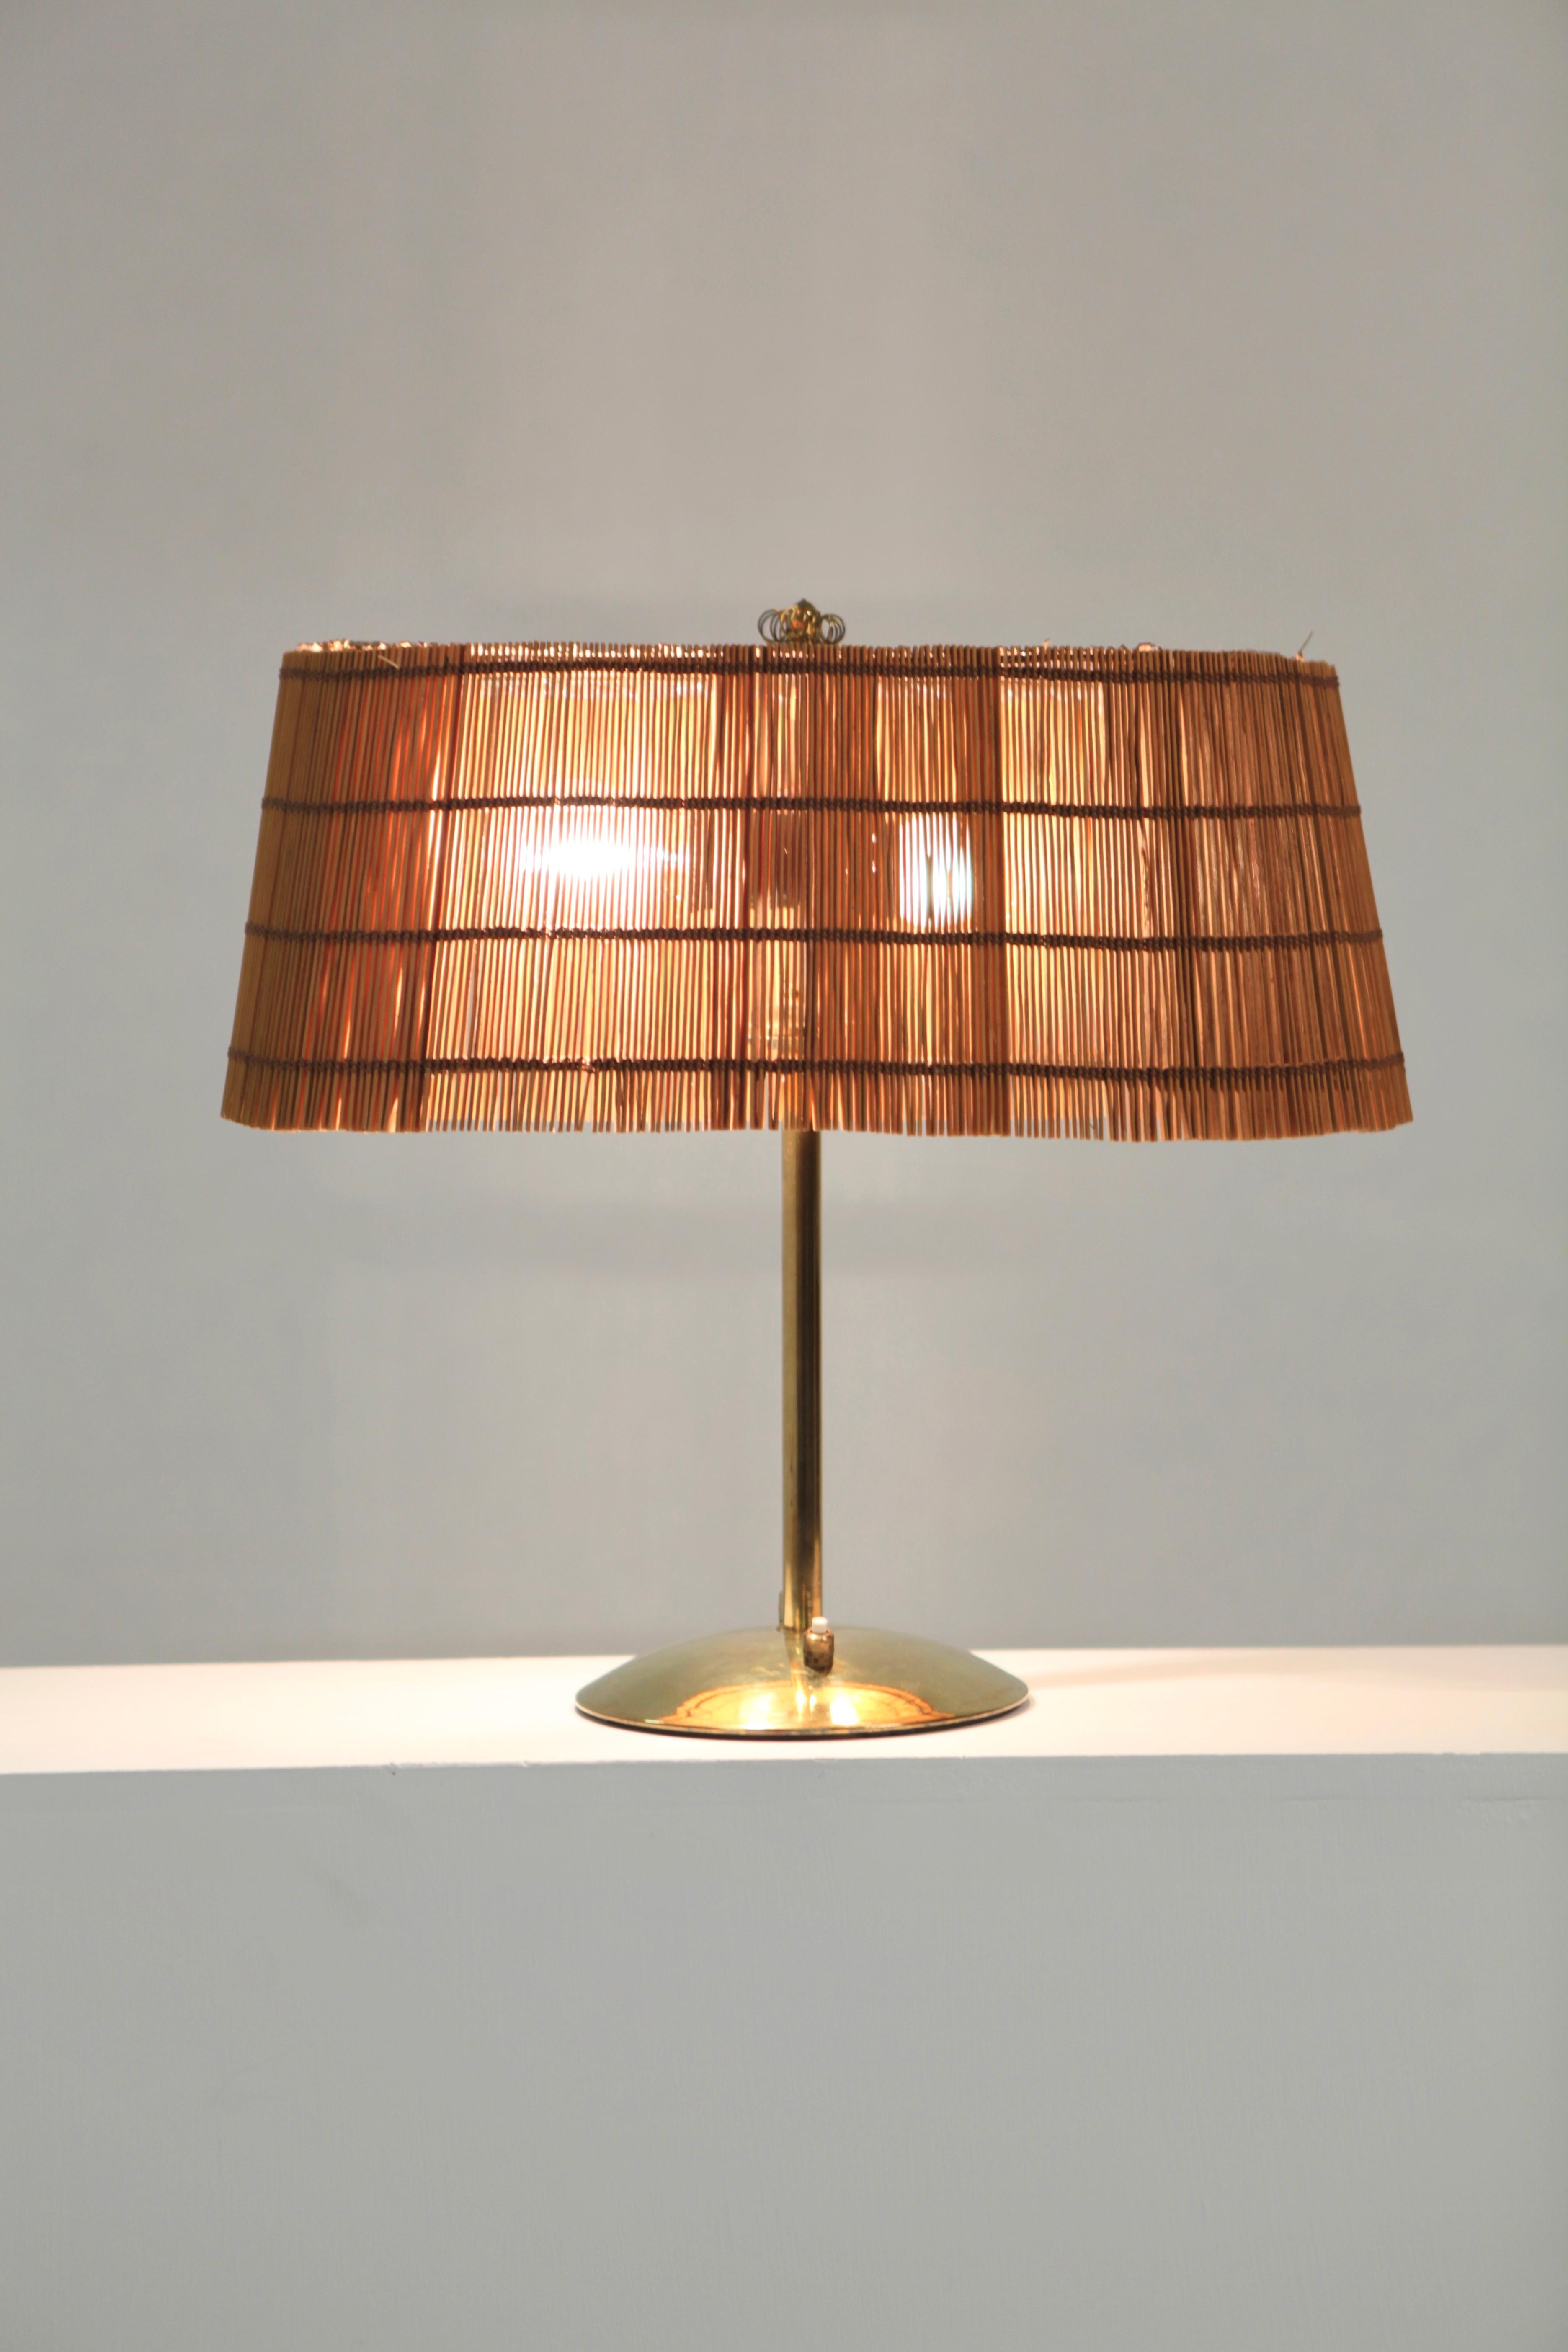 A rare table lamp, manufactured by Lasipaino Oy in Finland, 1940s.
Brass and wooden splints shade.